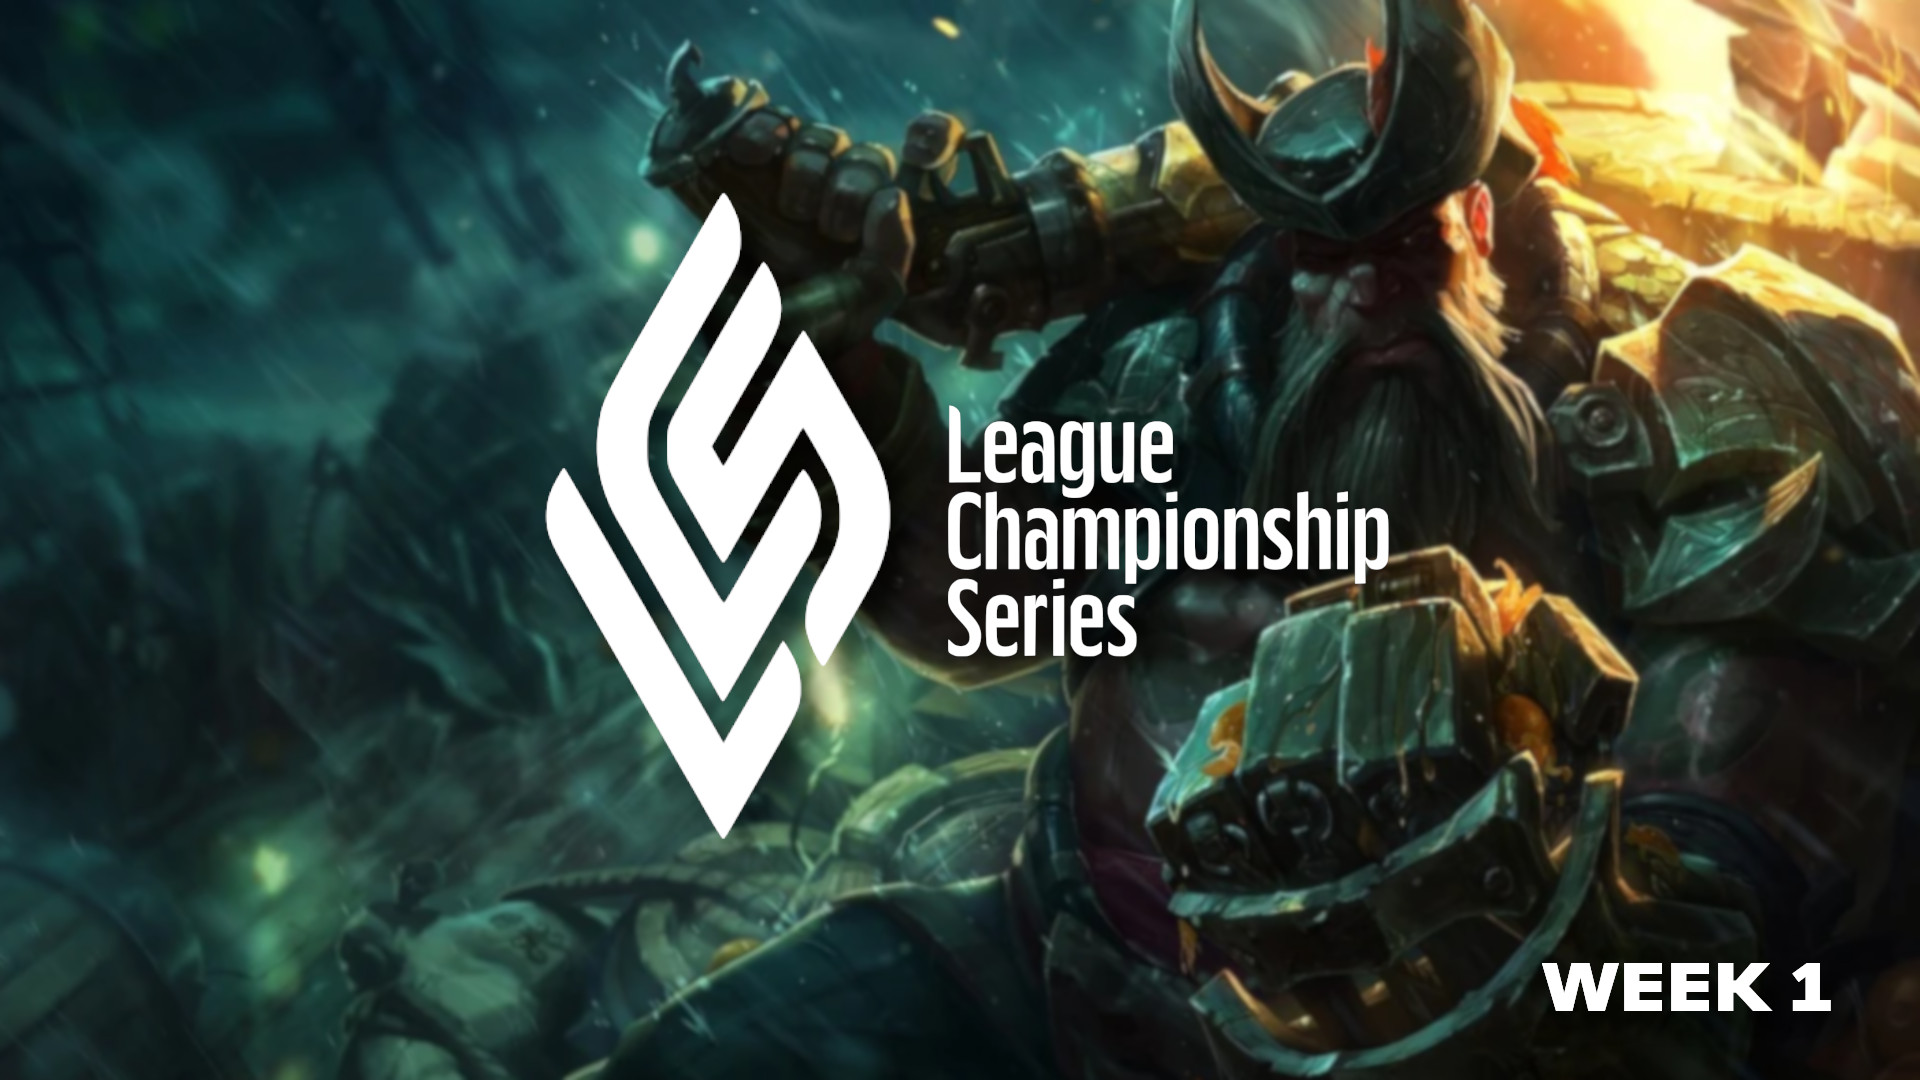 LCS Week 1 graphic featuring Gangplank